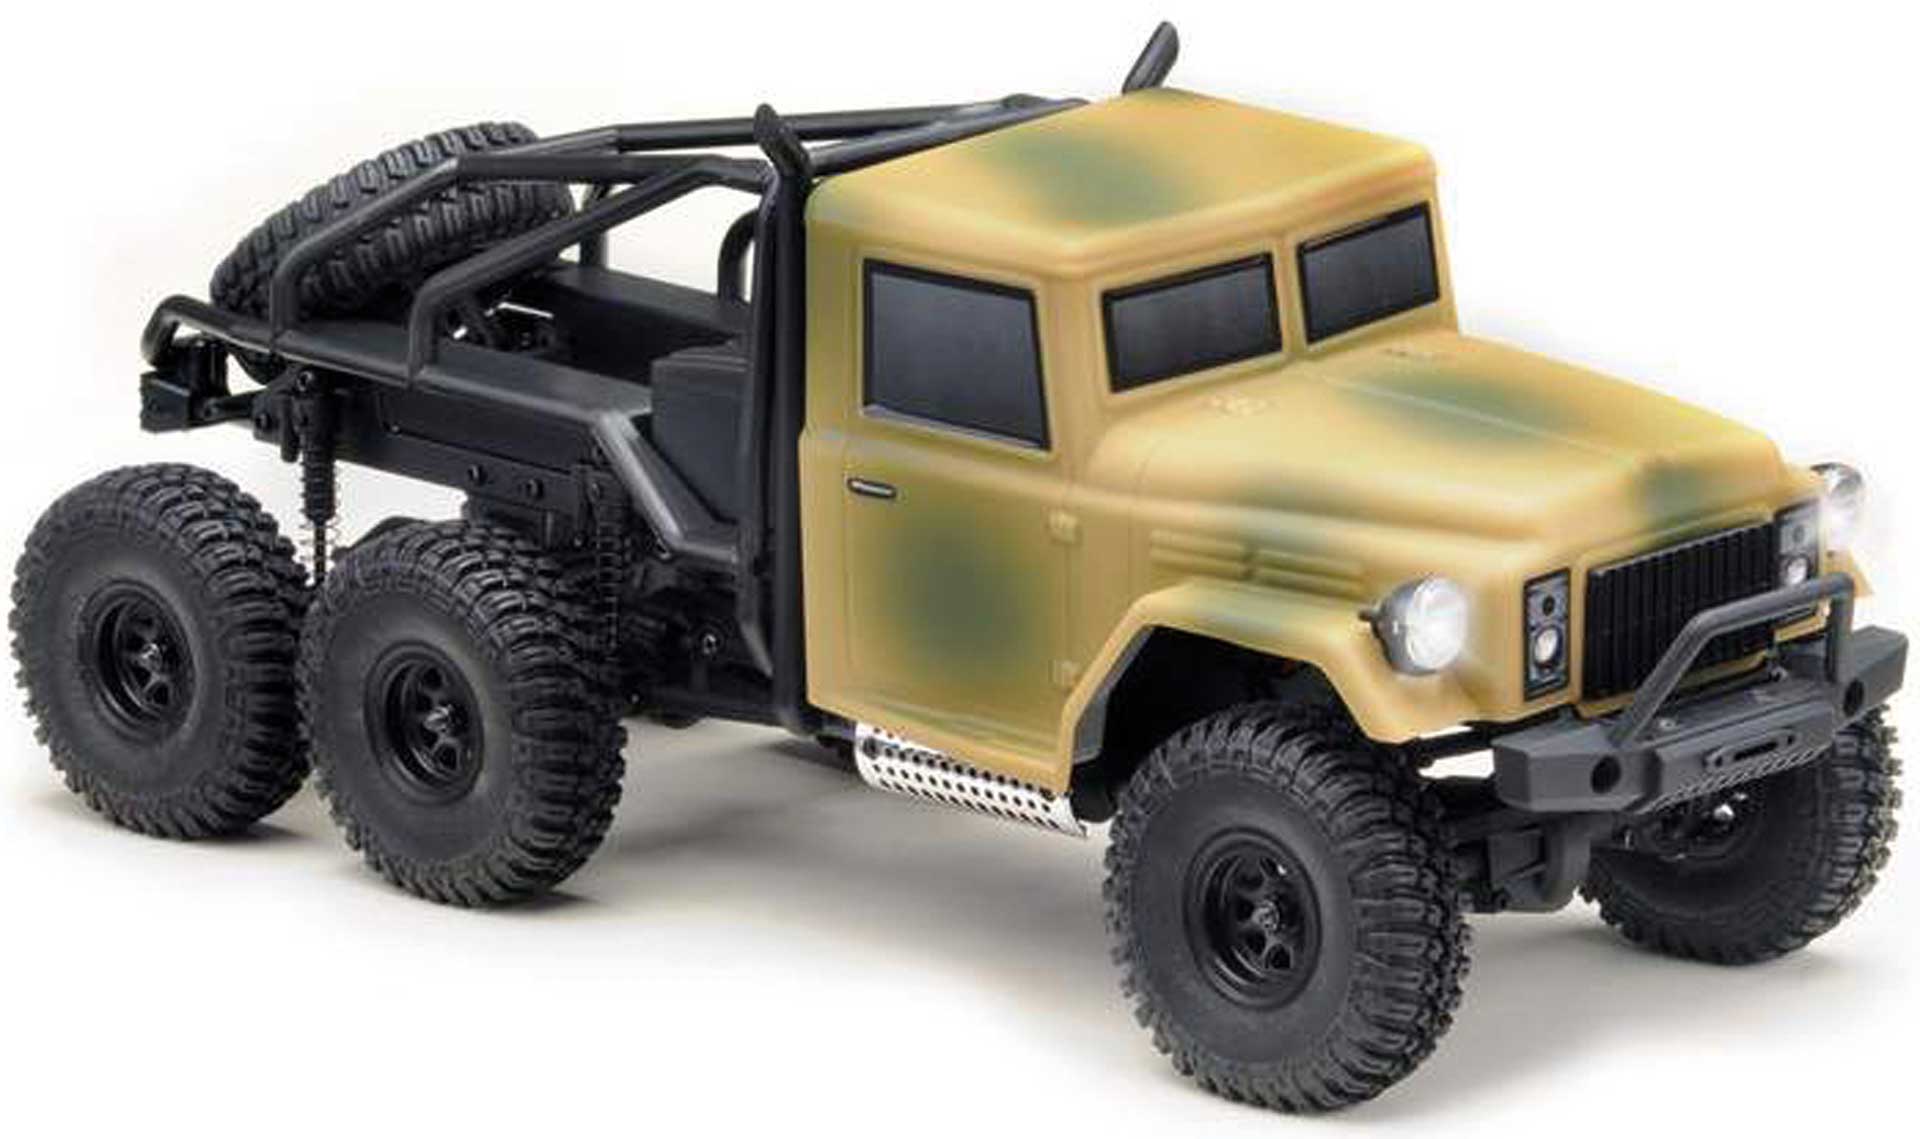 ABSIMA 1:18 Micro Crawler "6x6 US Trial Truck camouflage RTR